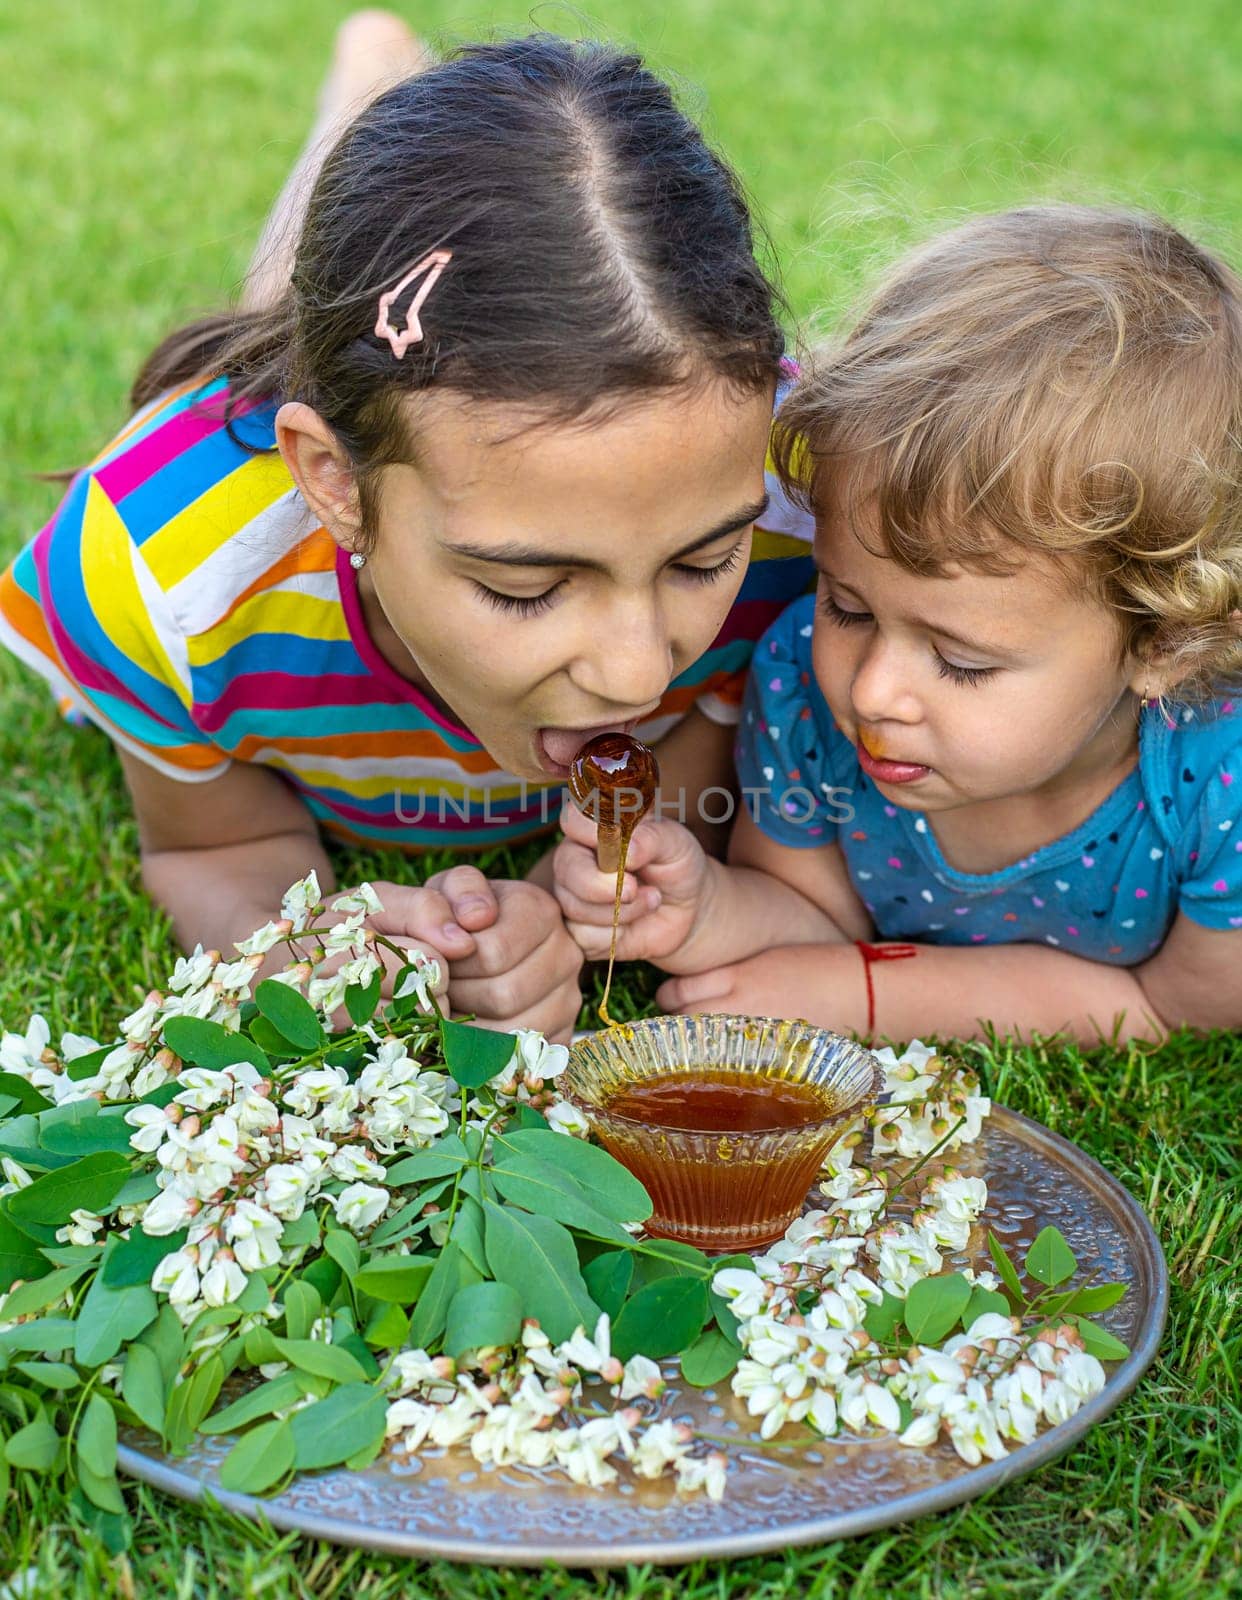 The child eats honey in the garden. Selective focus. Nature.